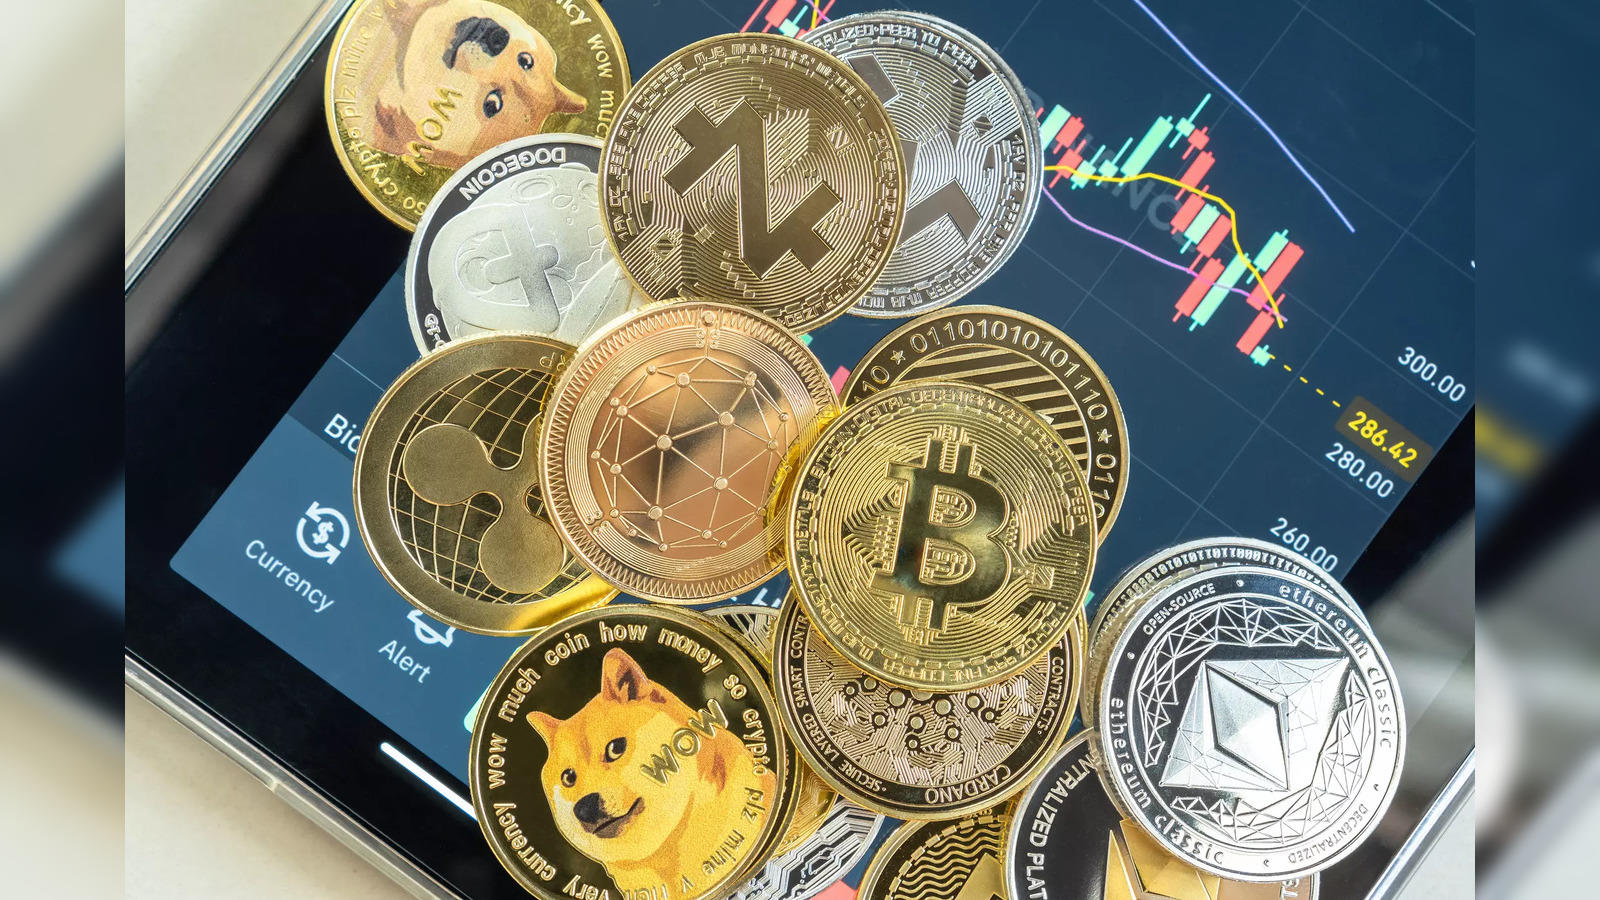 Digital Assets: Cryptocurrencies vs. Crypto Tokens